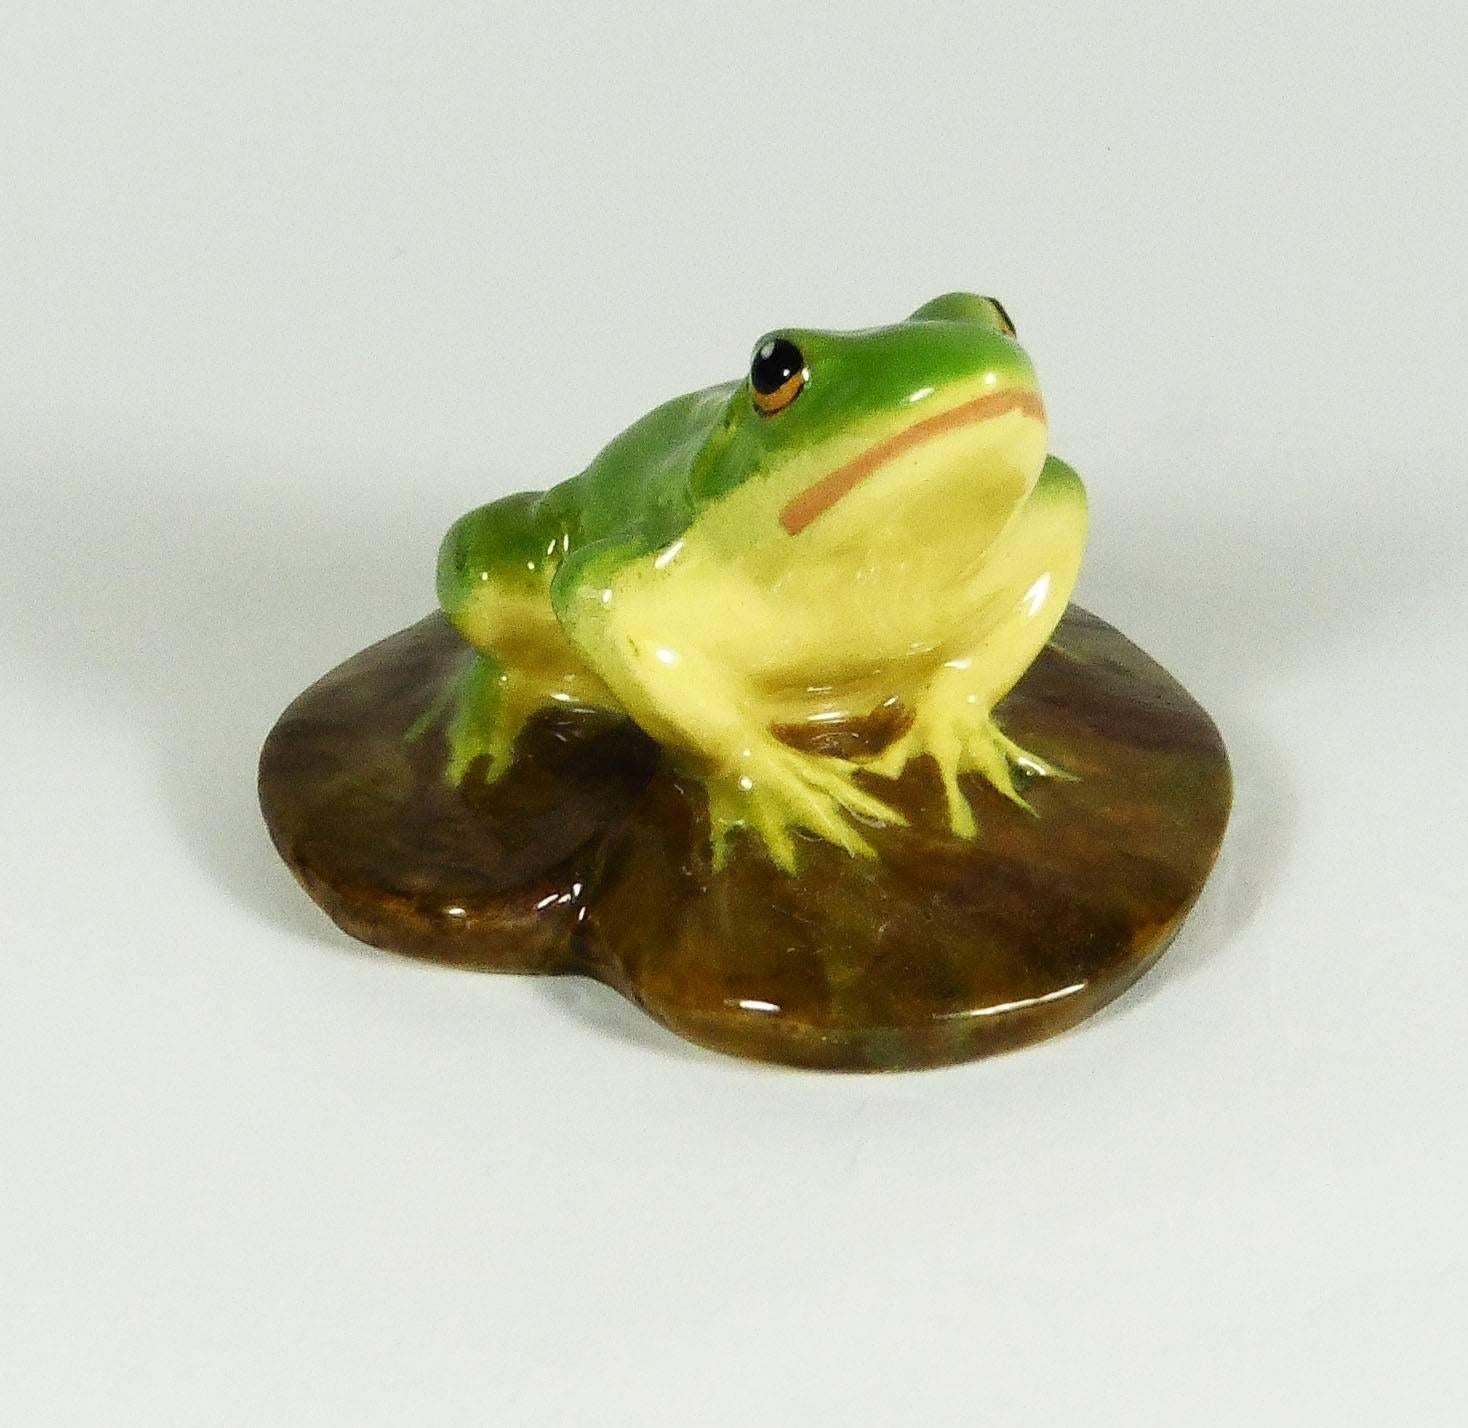 Lovely rare Majolica frog on a brown lily pad leaf signed Jerome Massier, circa 1900.
Reference / Page 118,119 